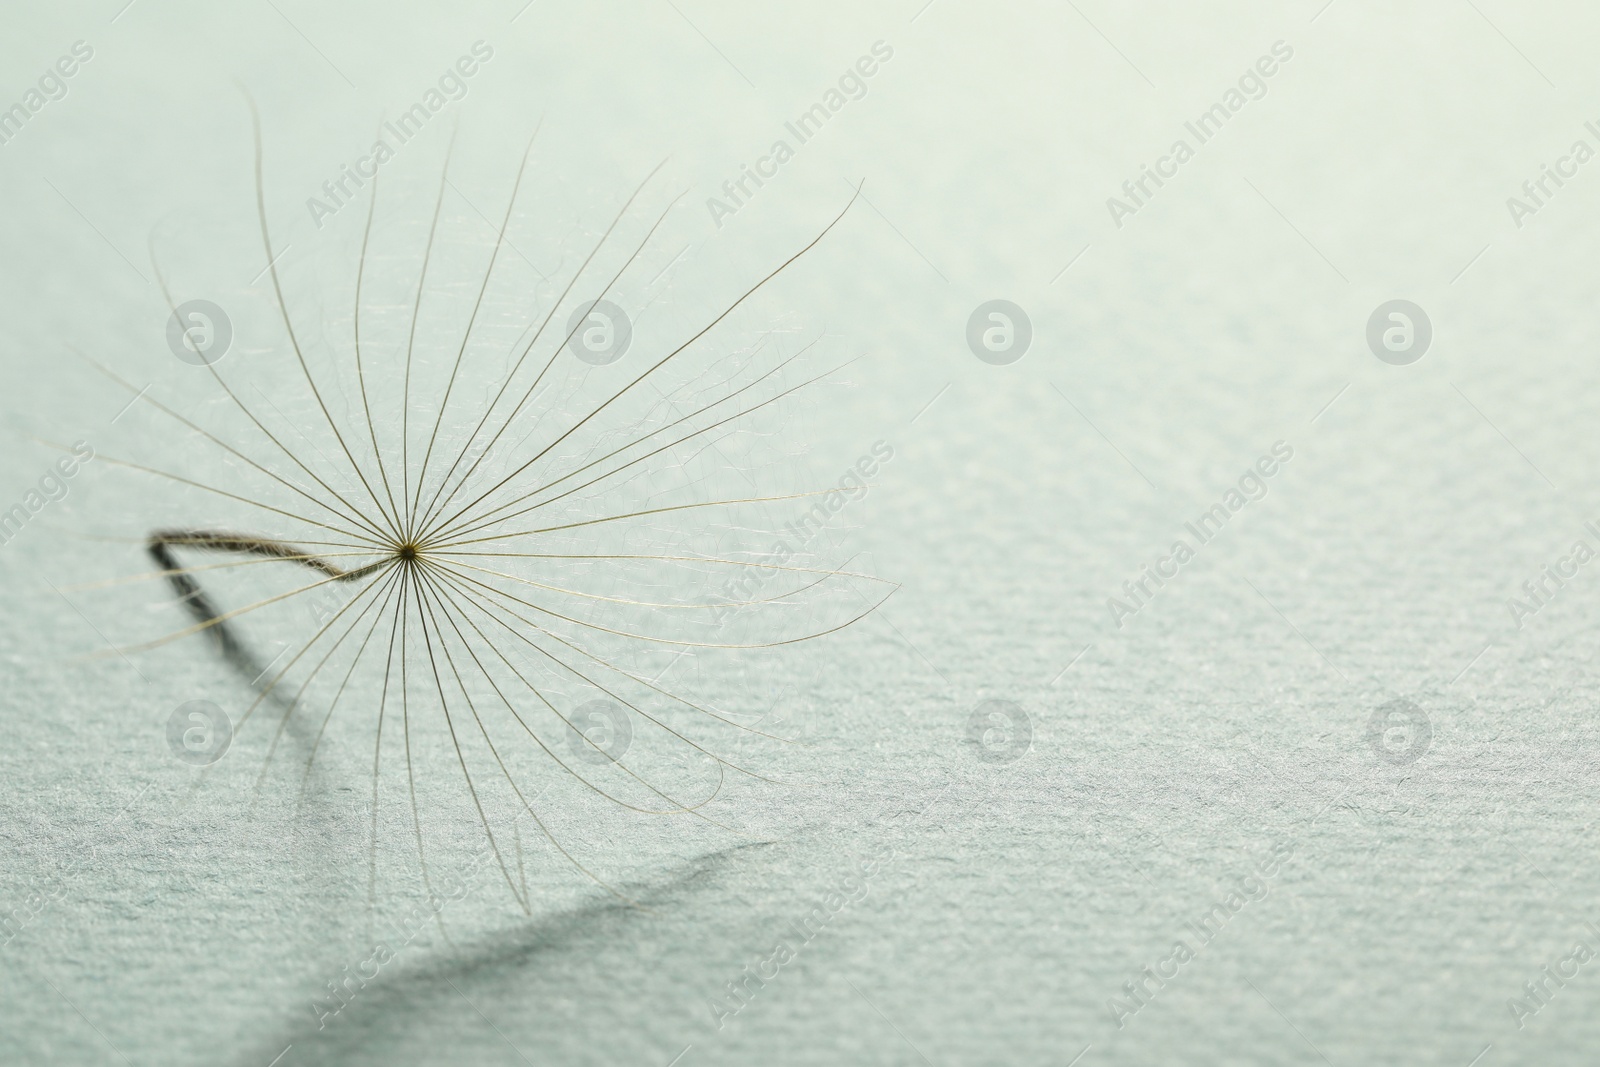 Photo of Seed of dandelion flower on light background, closeup. Space for text